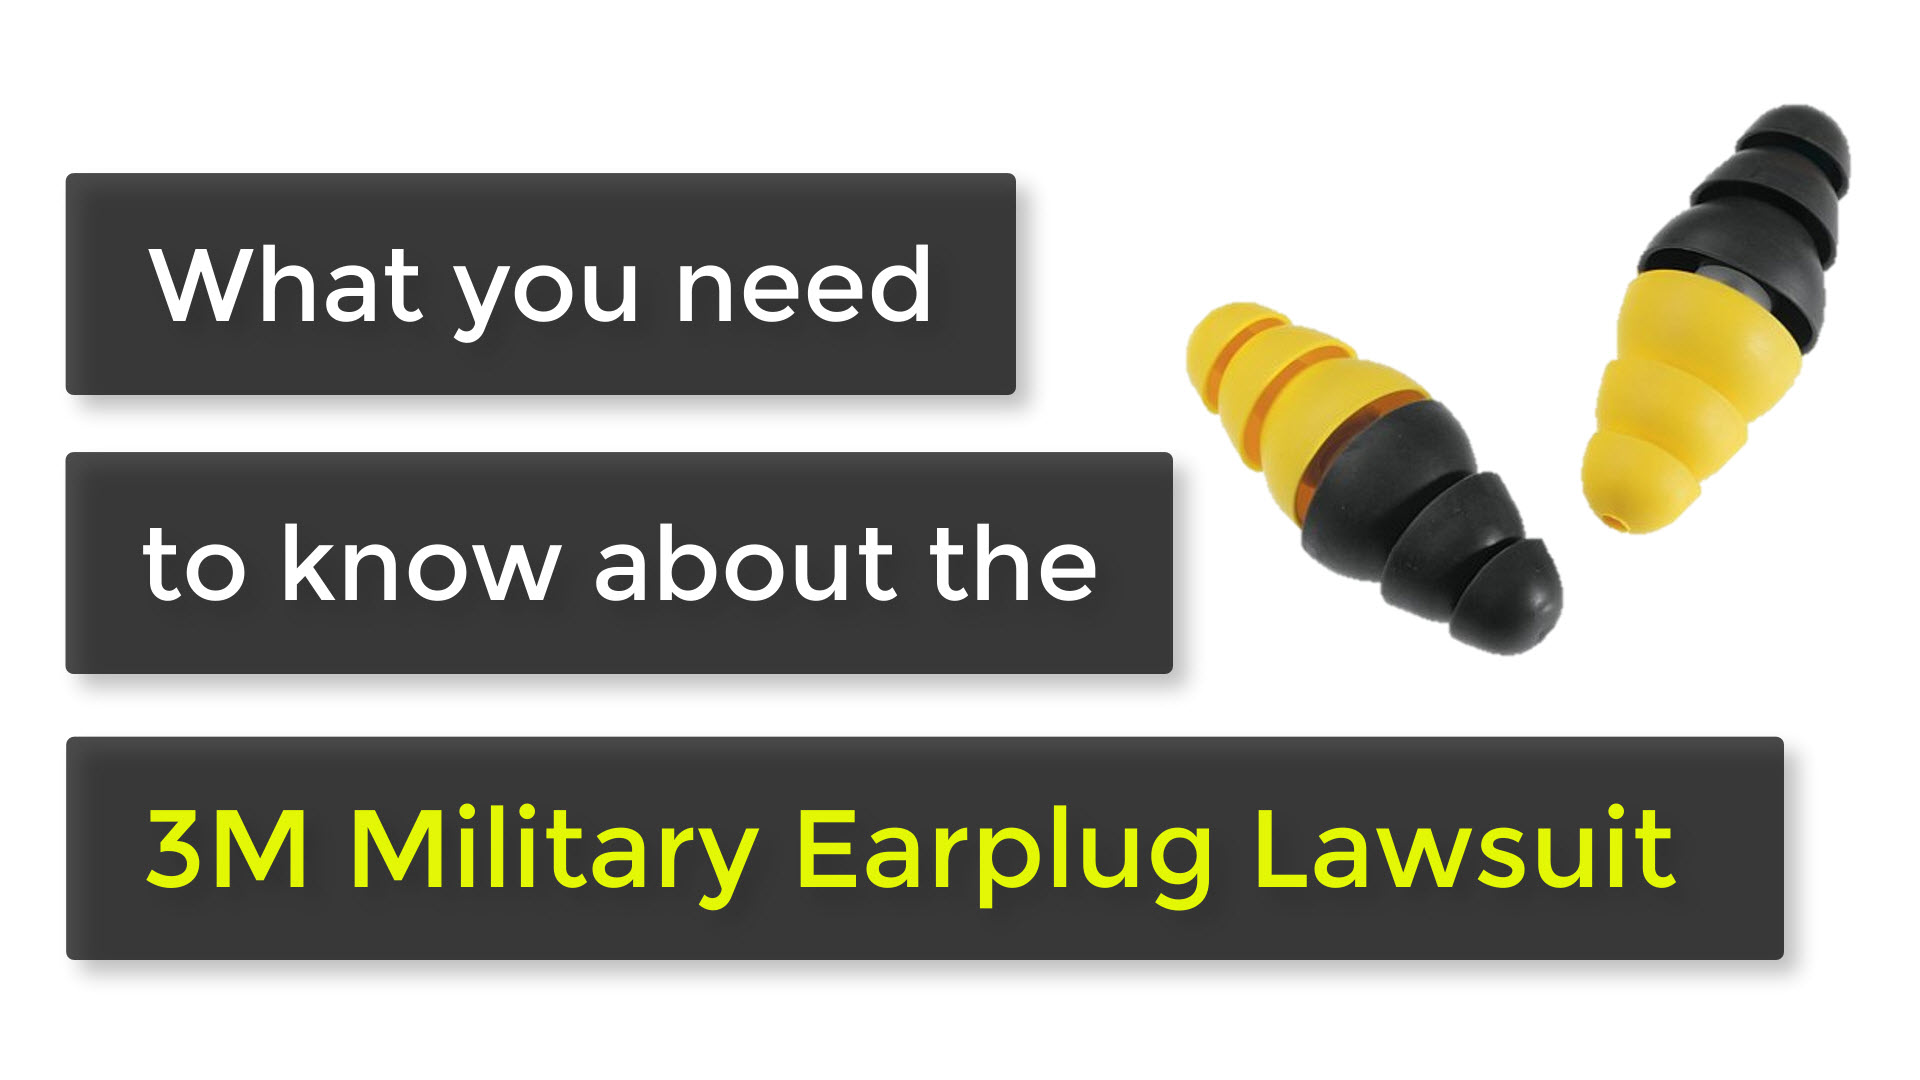 What you need to know about the 3M Military Earplug Lawsuit 3M